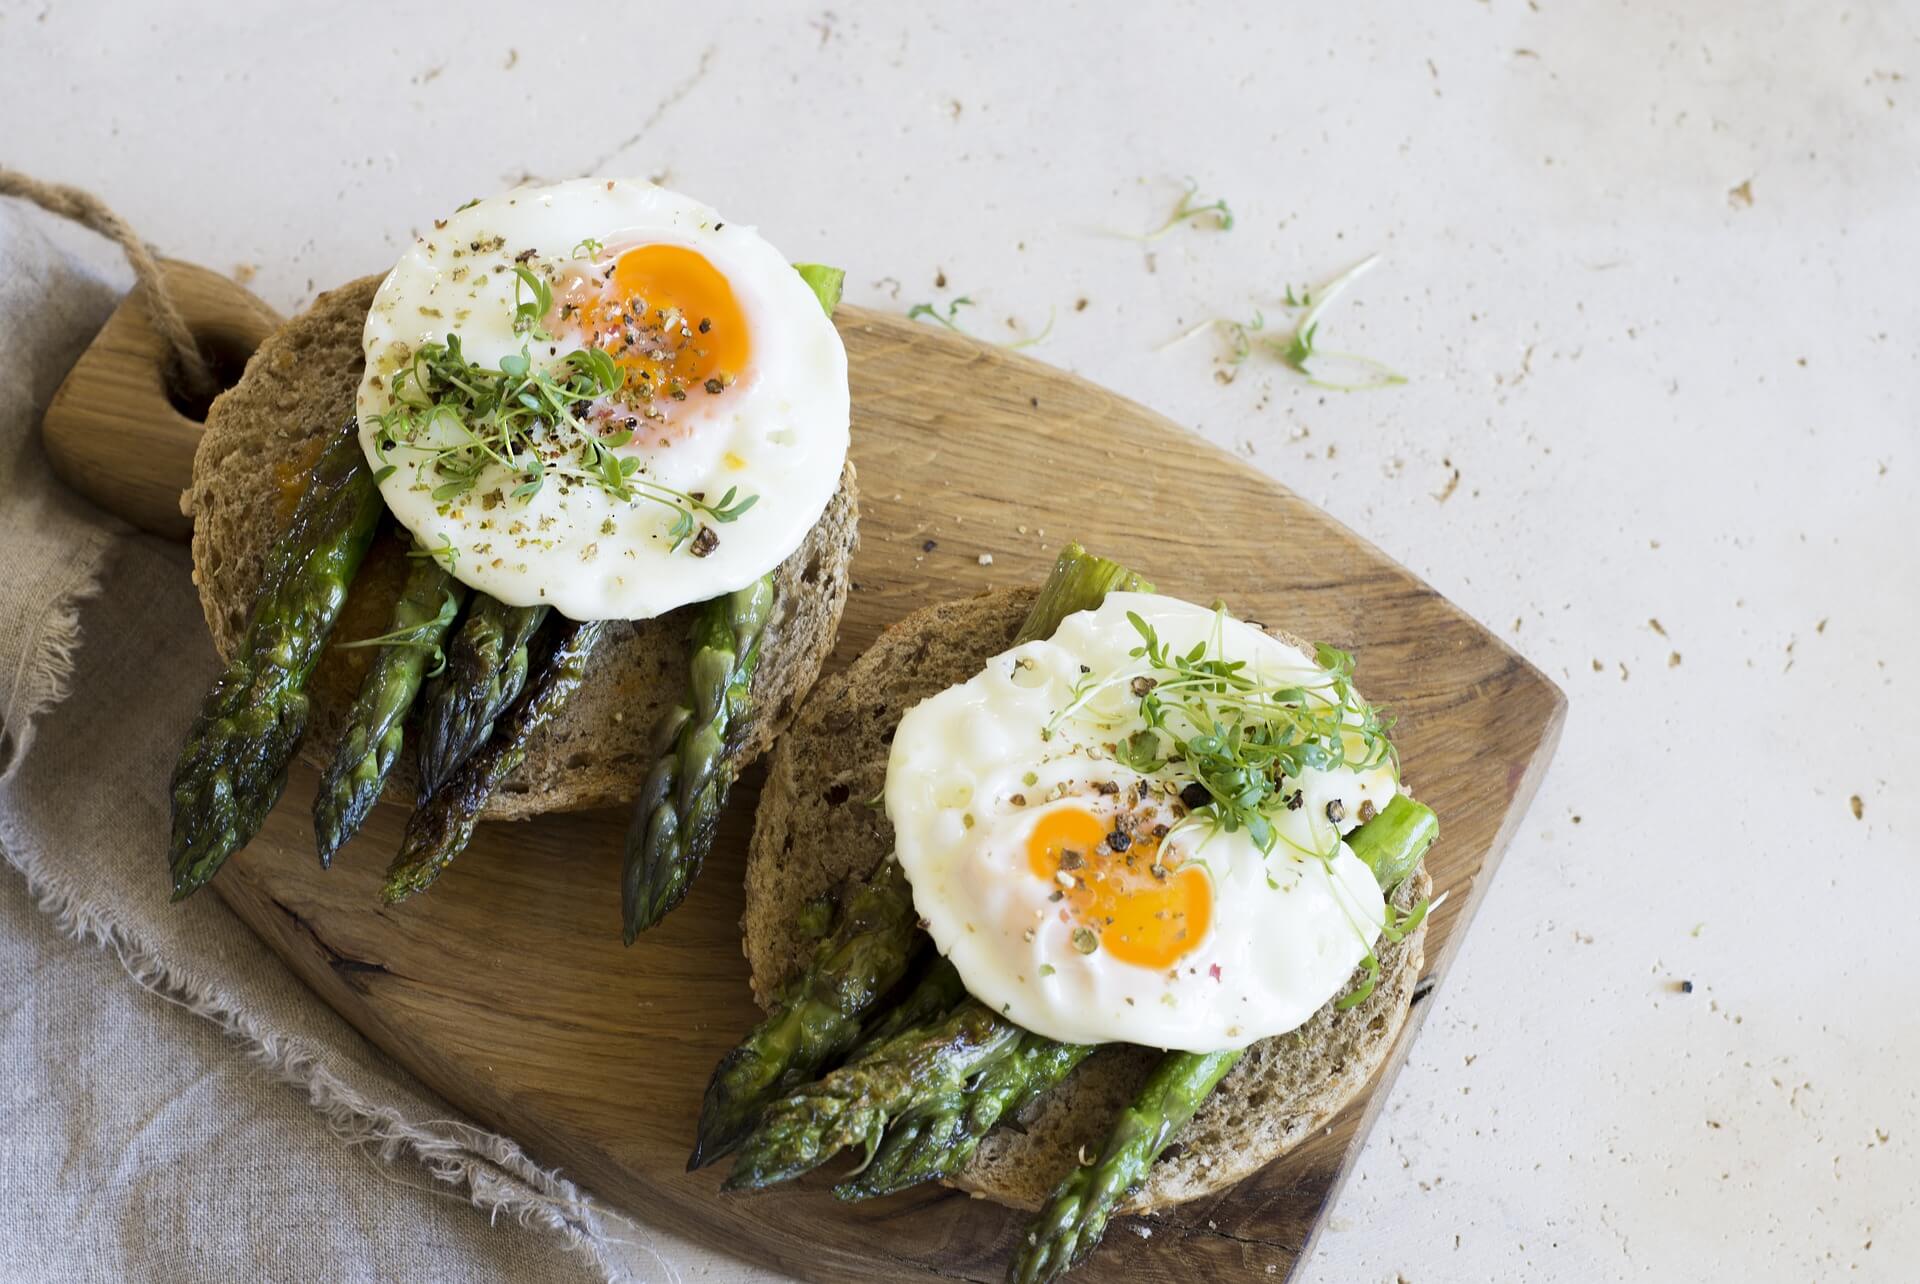 Breakfast: Poached egg on asparagus and sour dough